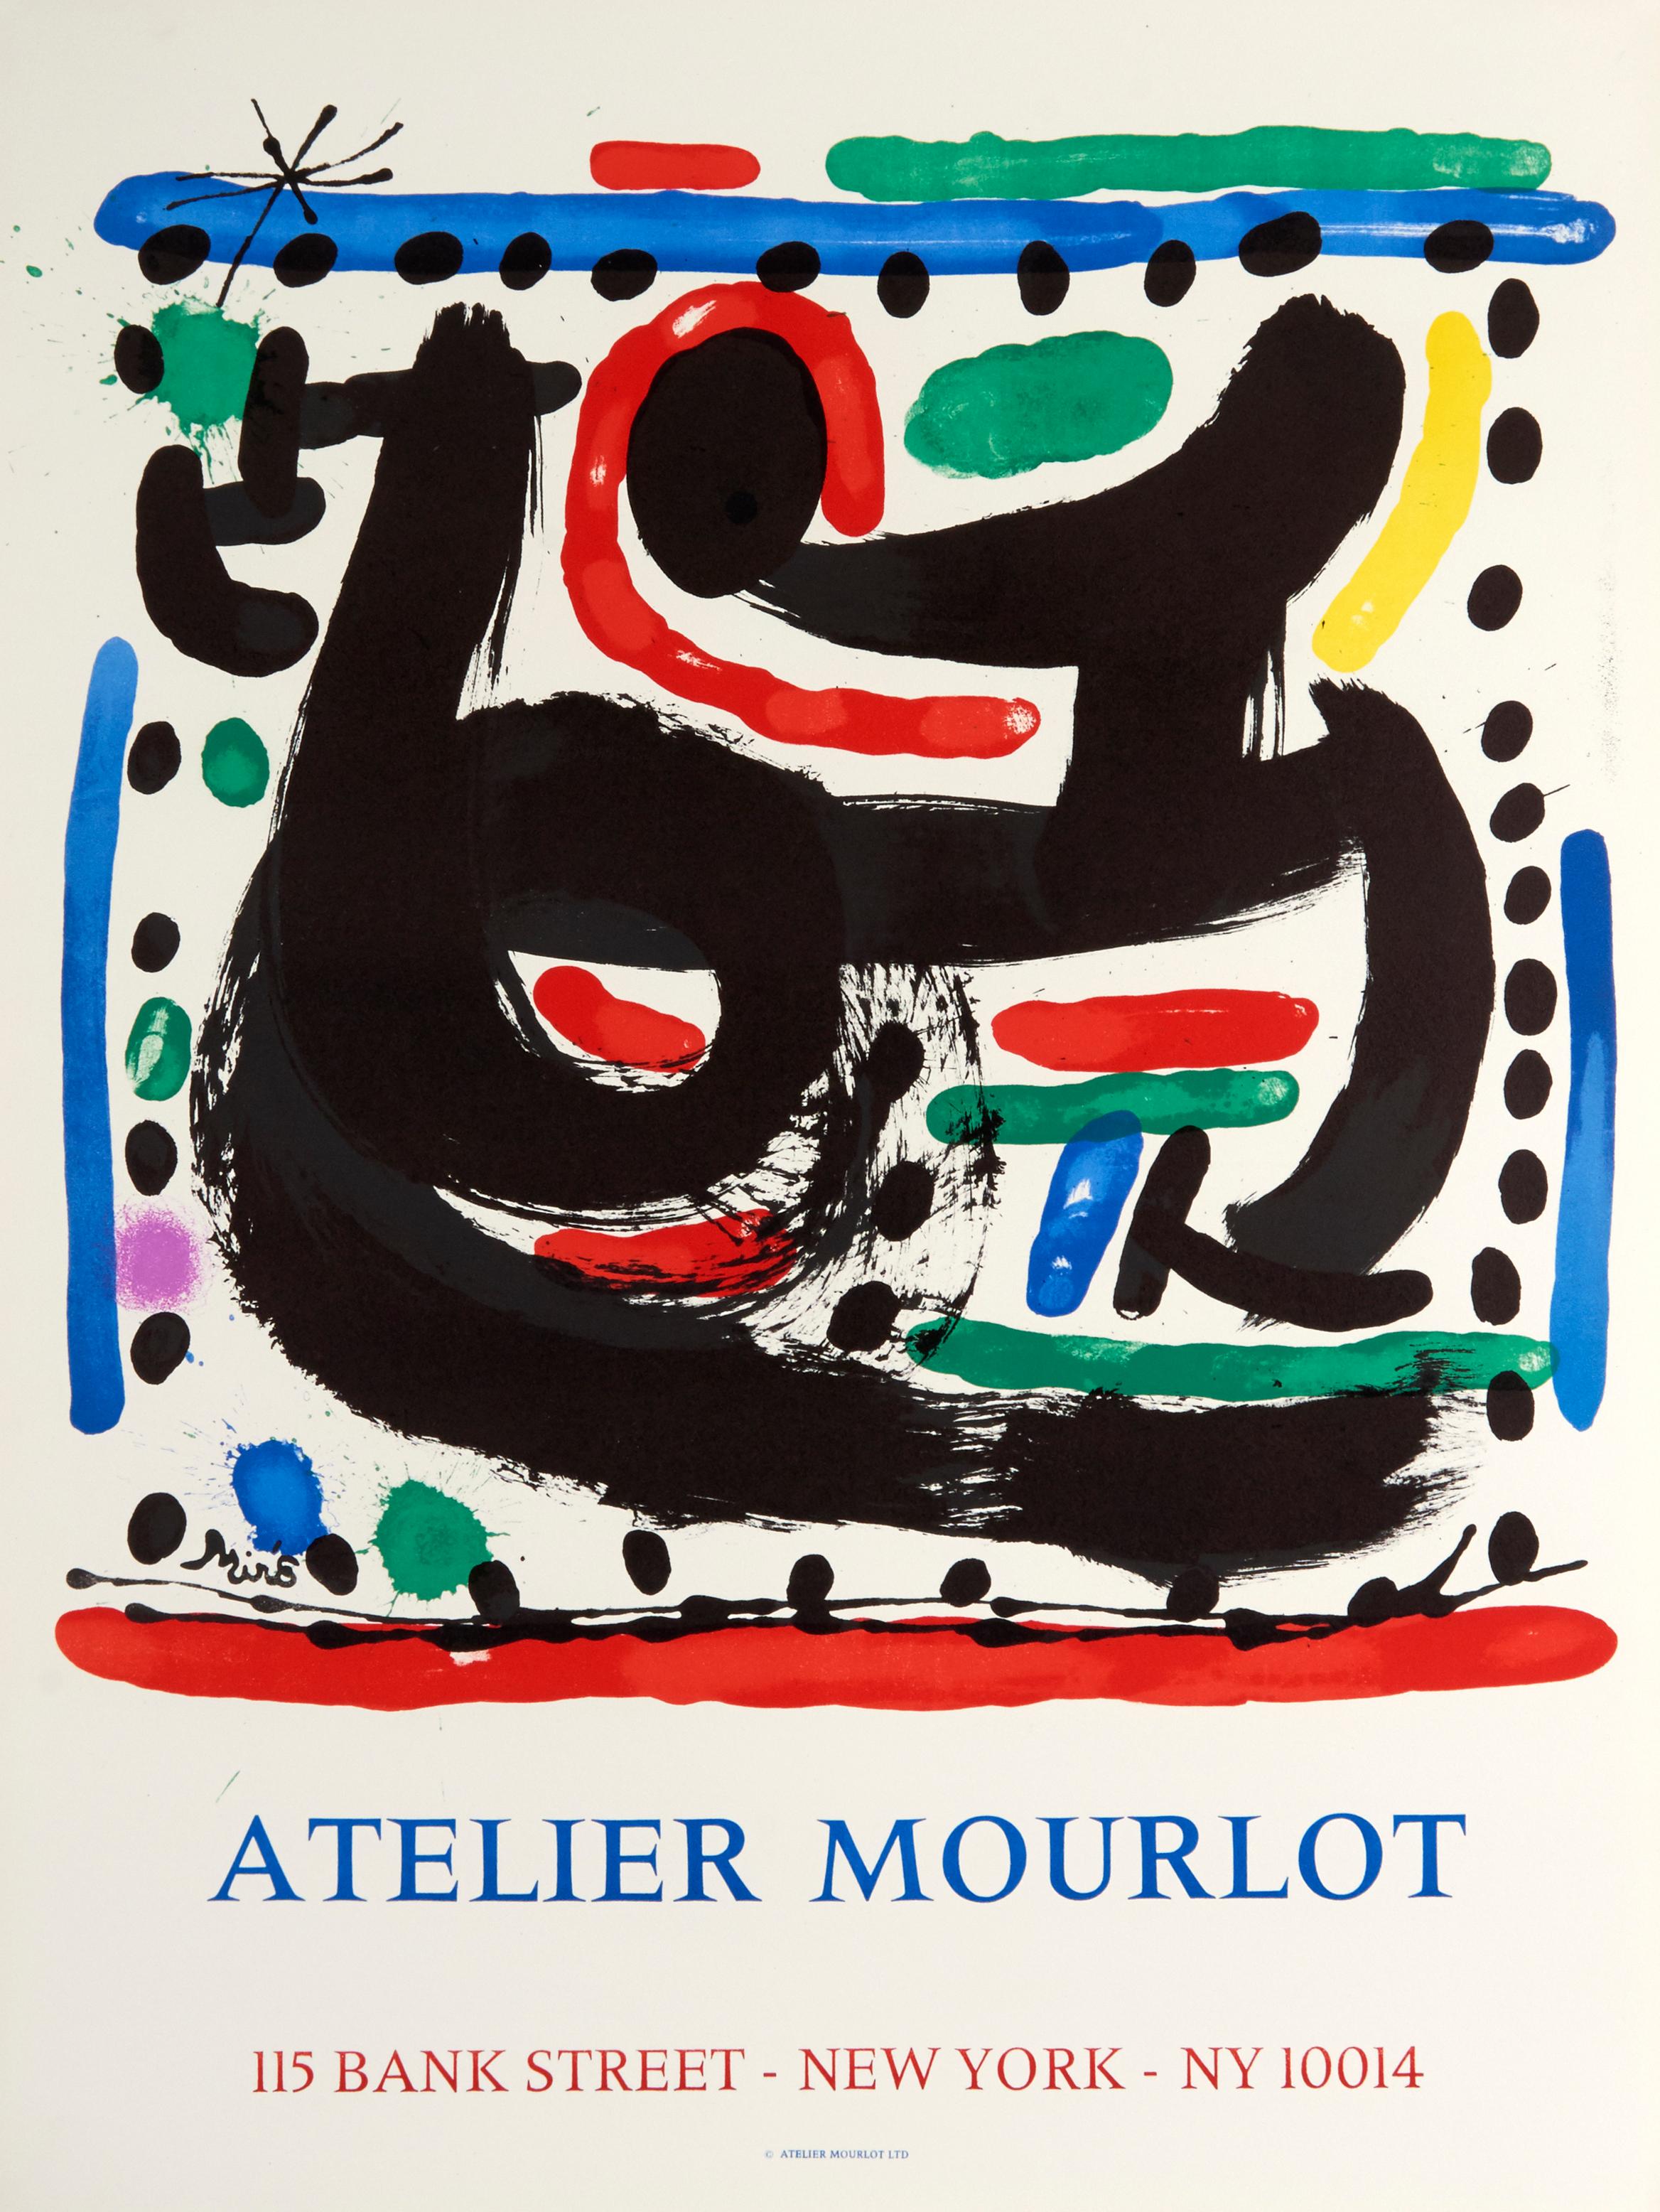 Atelier Mourlot Bank Street by Joan Miro - colorful abstract original lithograph